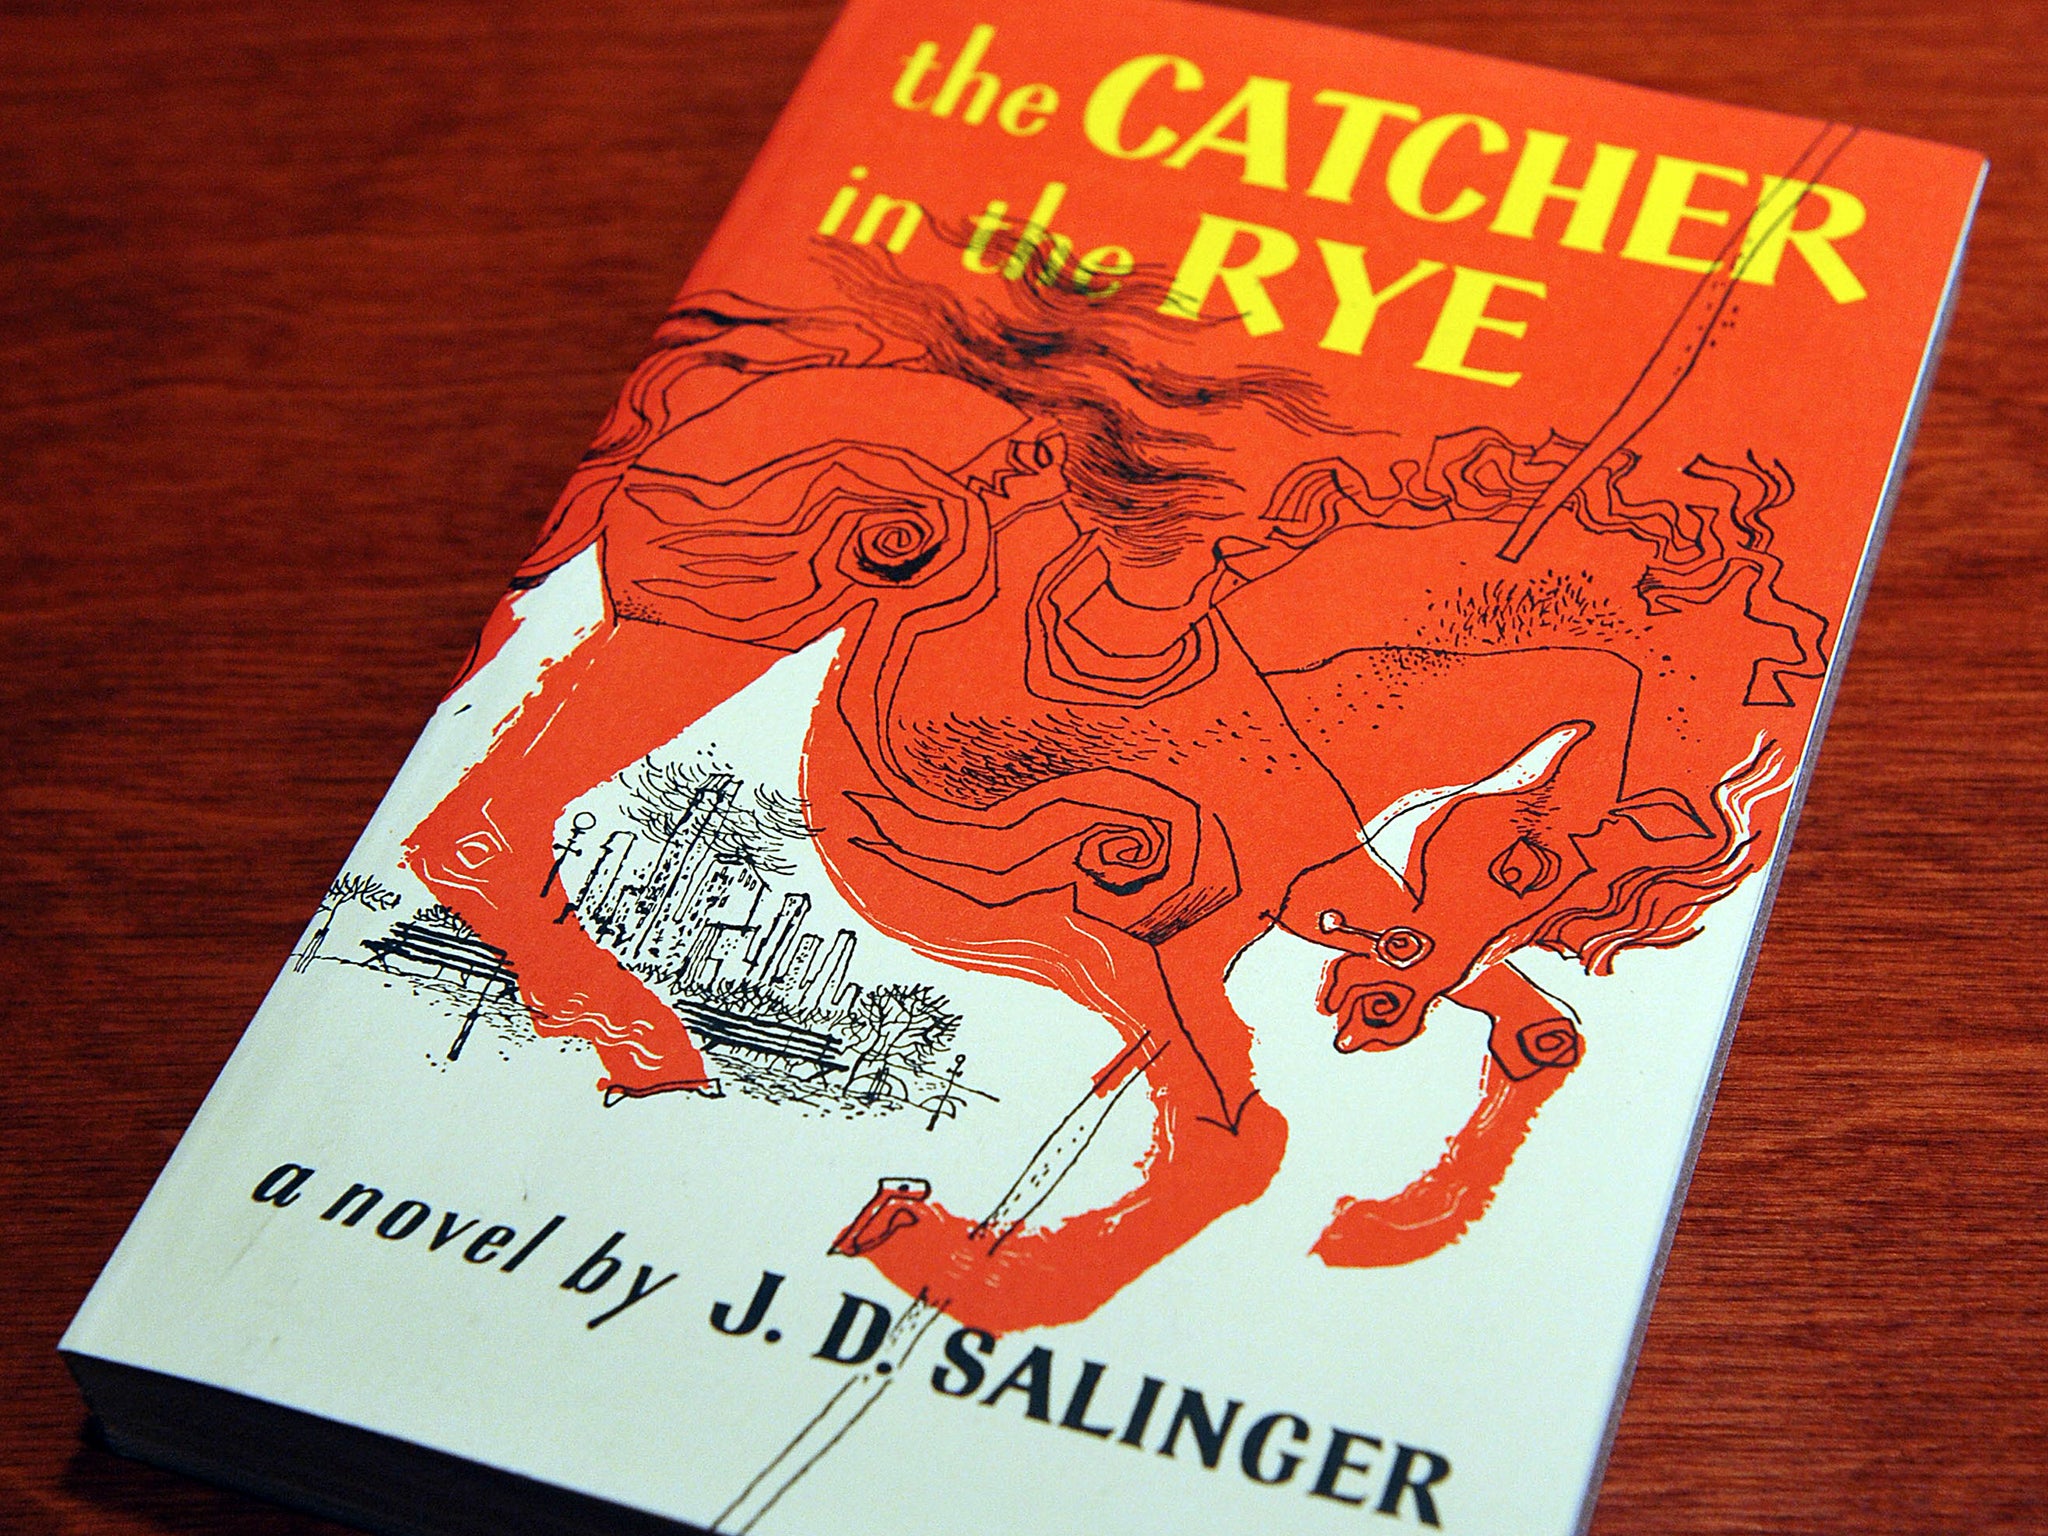 the catcher in the rye by j.d. salinger